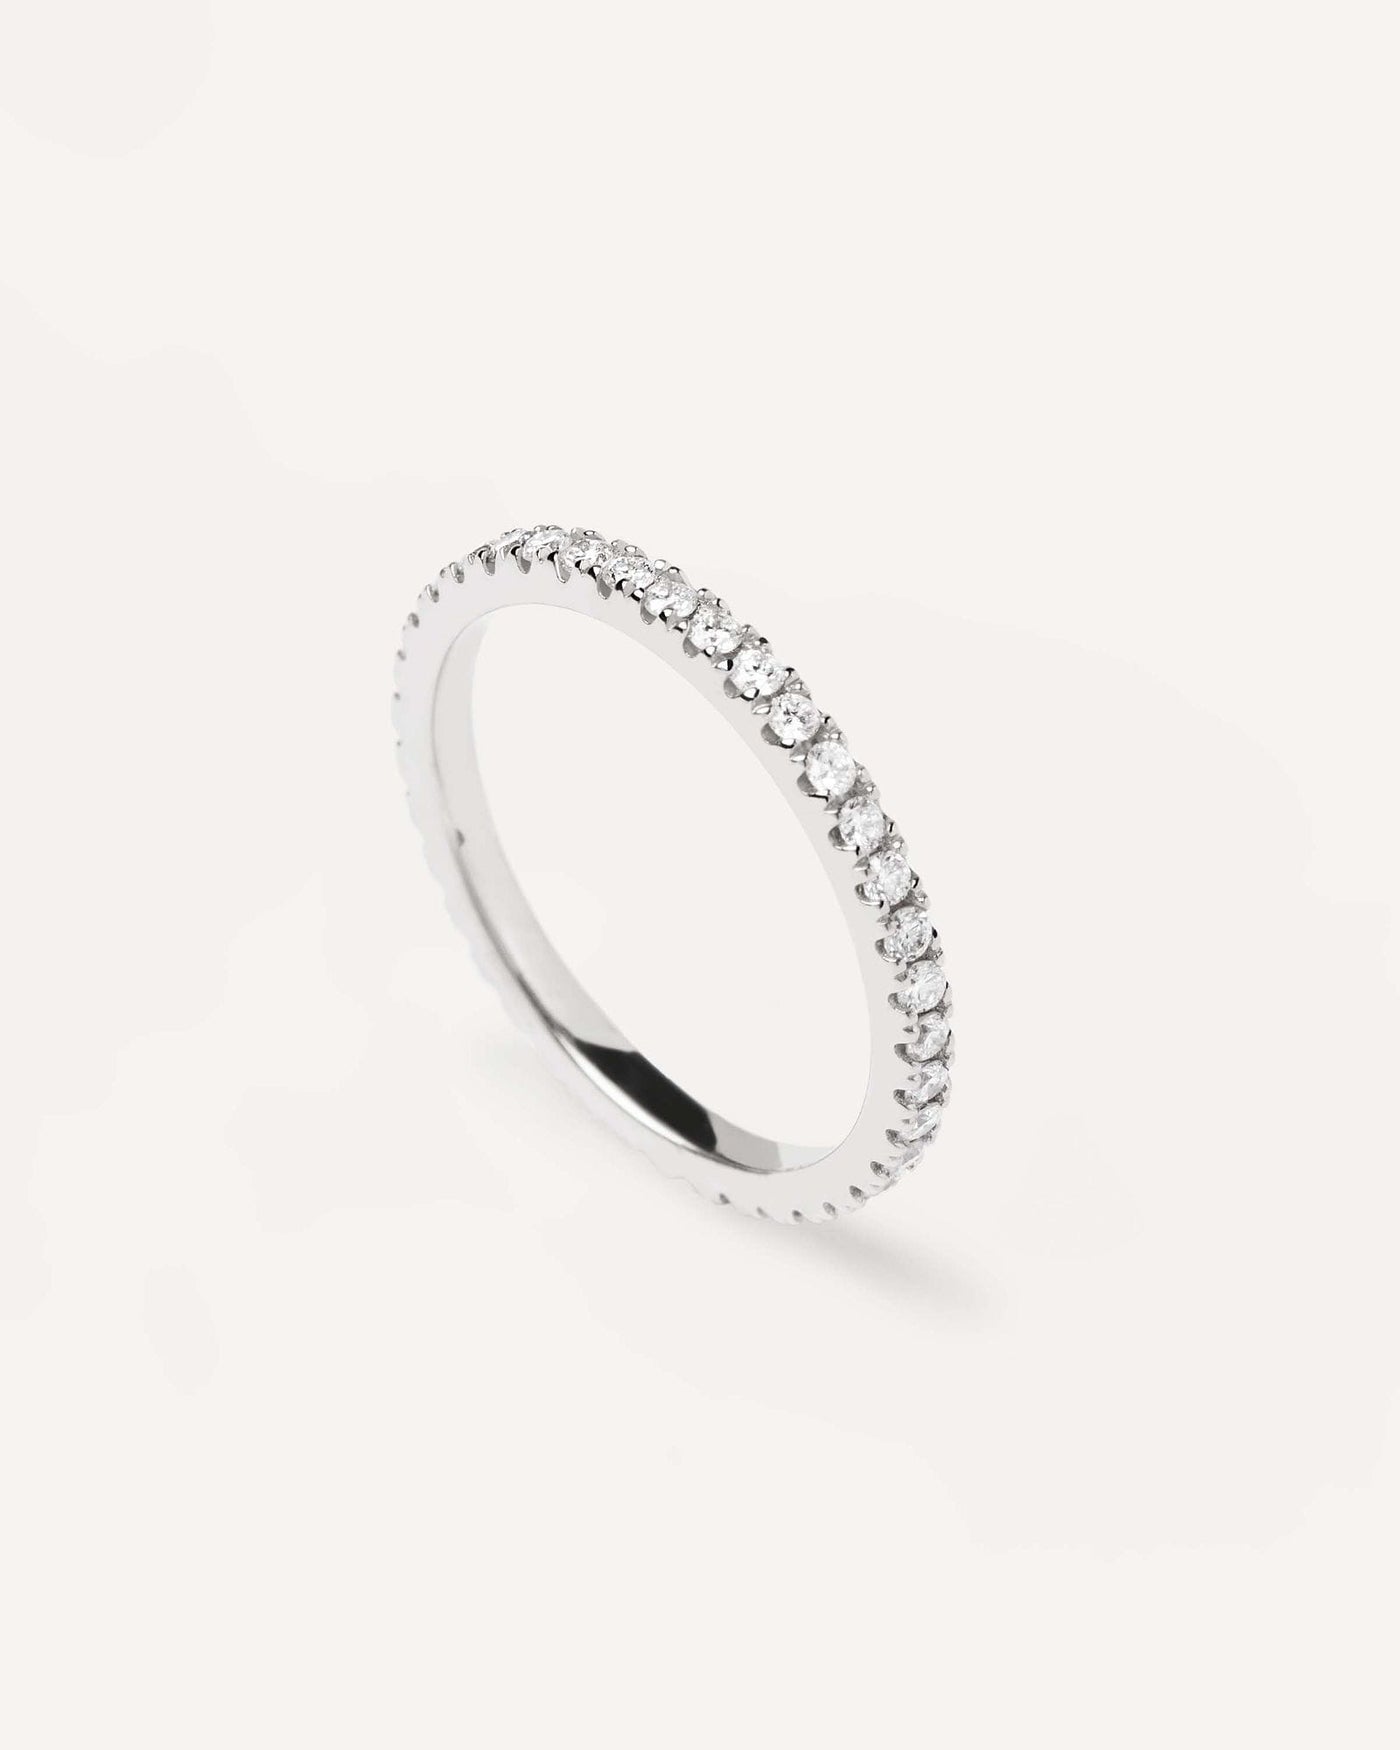 2024 Selection | Diamonds and White Gold Eternity Medium Ring. Solid white gold eternity ring, set with lab-grown diamonds, equaling 0.5 carats. Get the latest arrival from PDPAOLA. Place your order safely and get this Best Seller. Free Shipping.